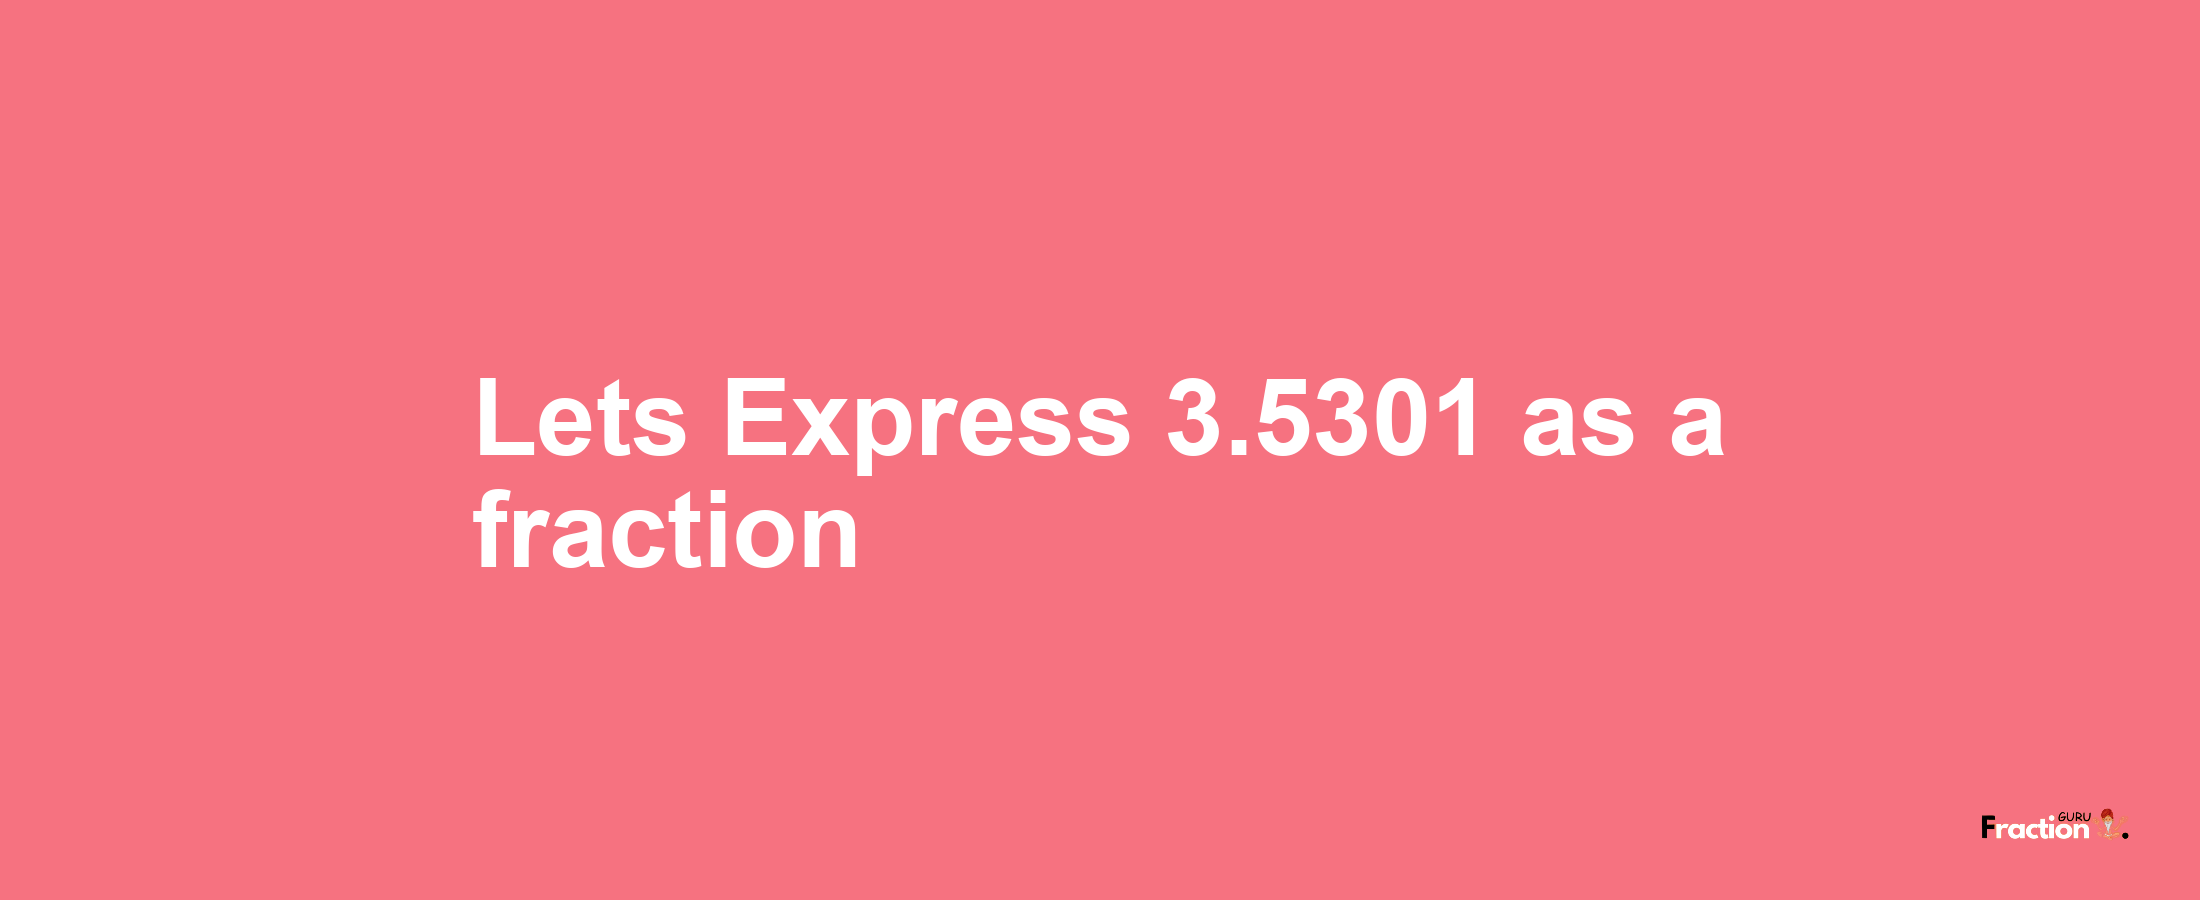 Lets Express 3.5301 as afraction